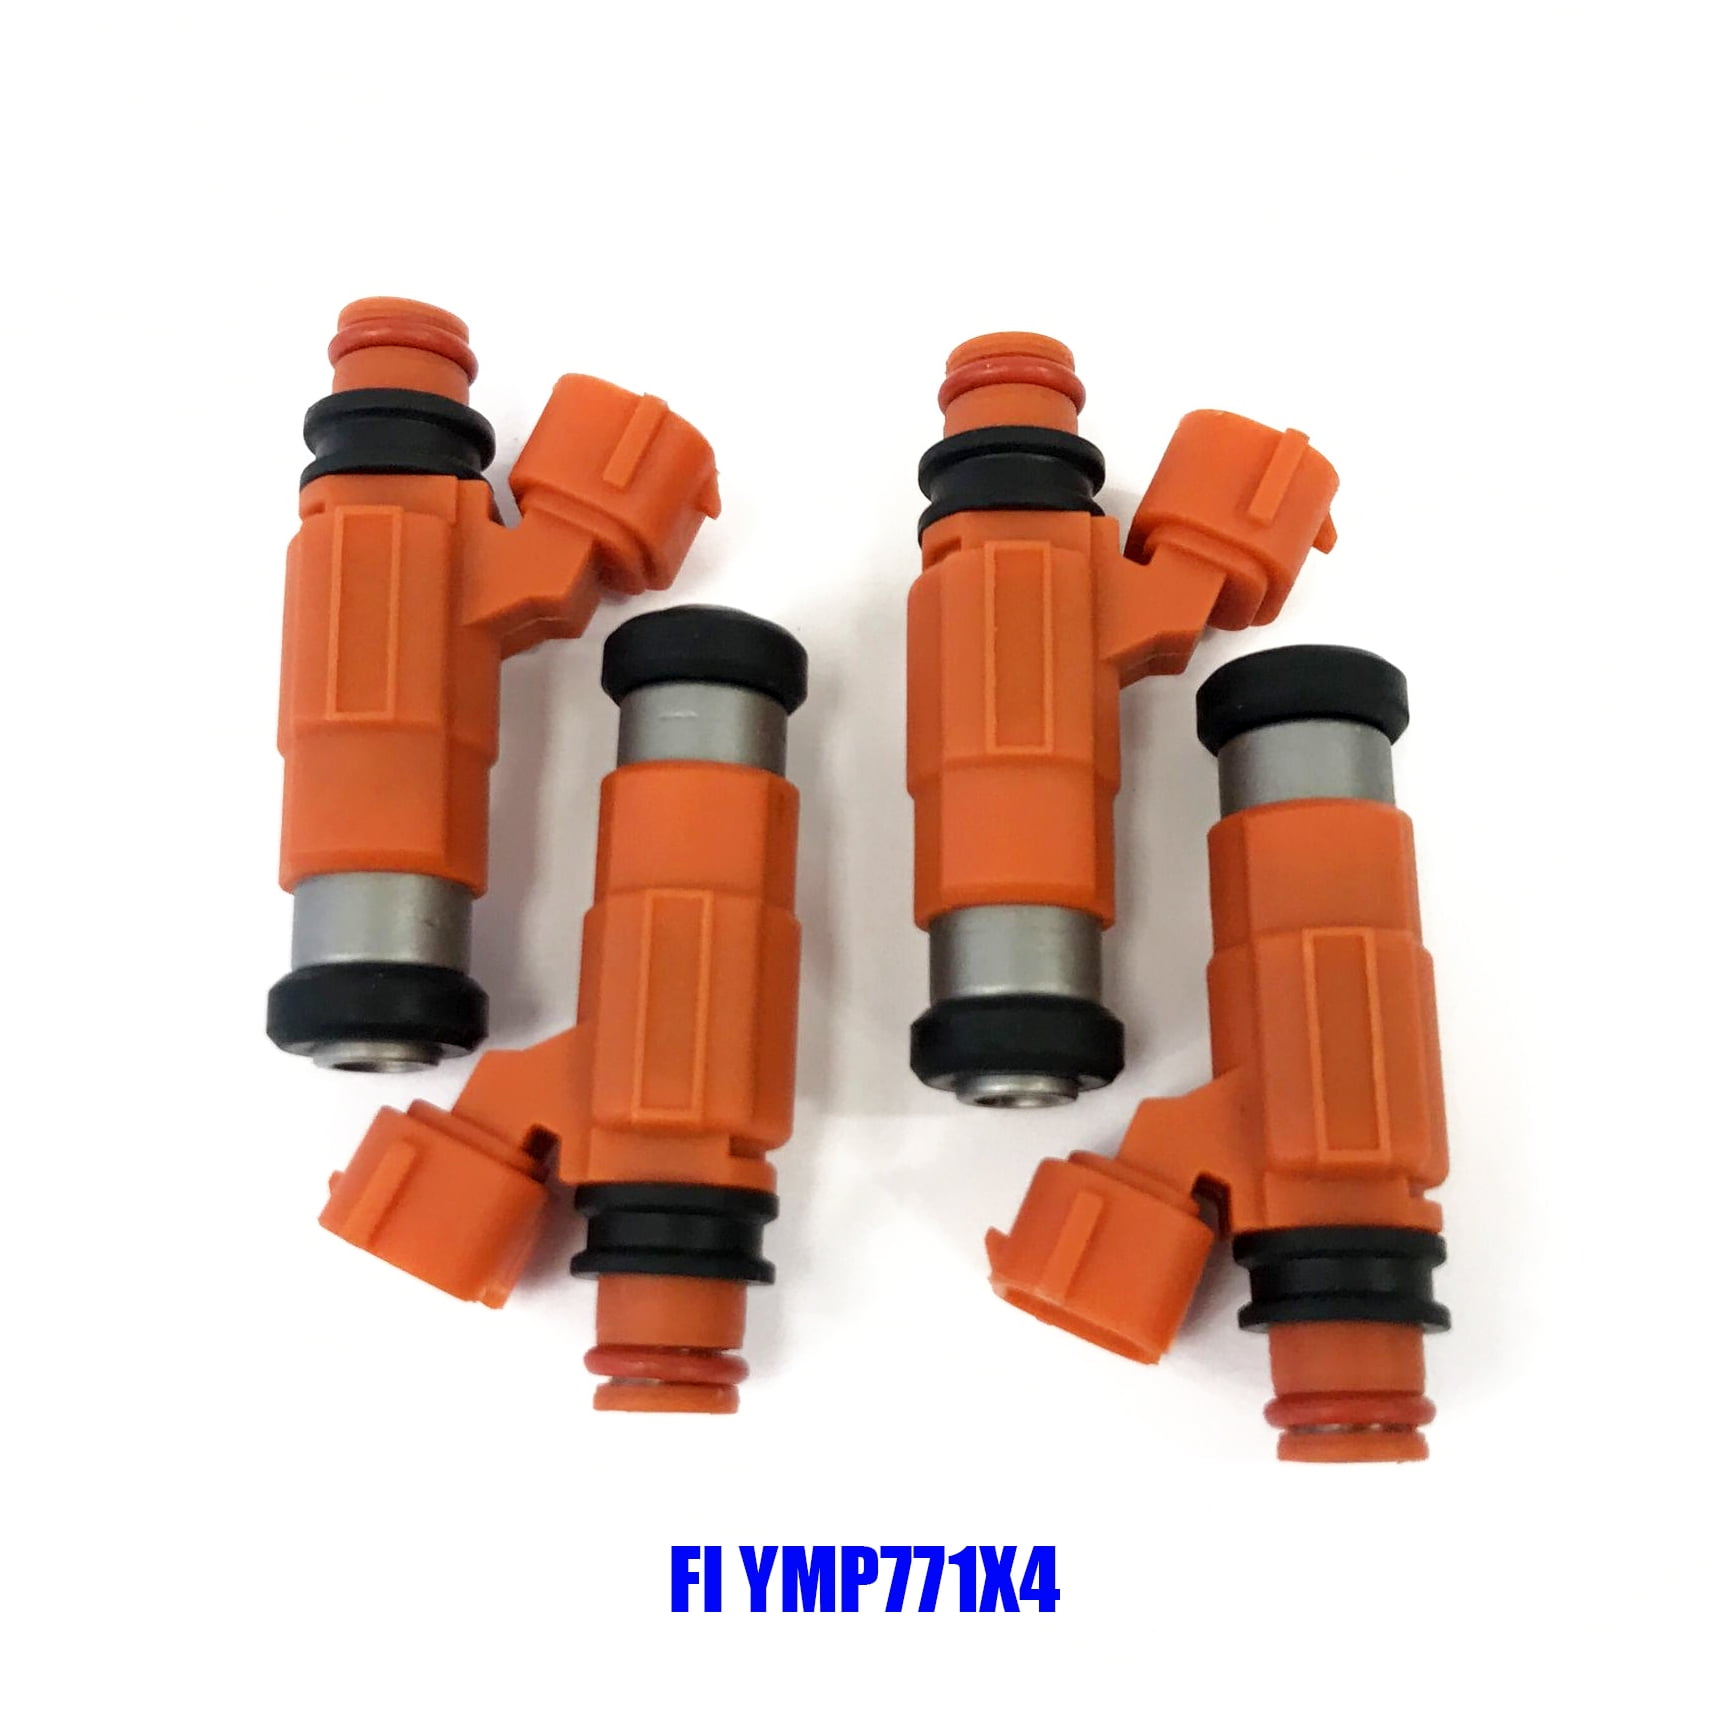 4x Fuel Injector Flow Matched 68V-8A360-00-00 for Yamaha Outboard 115 HP Marine 